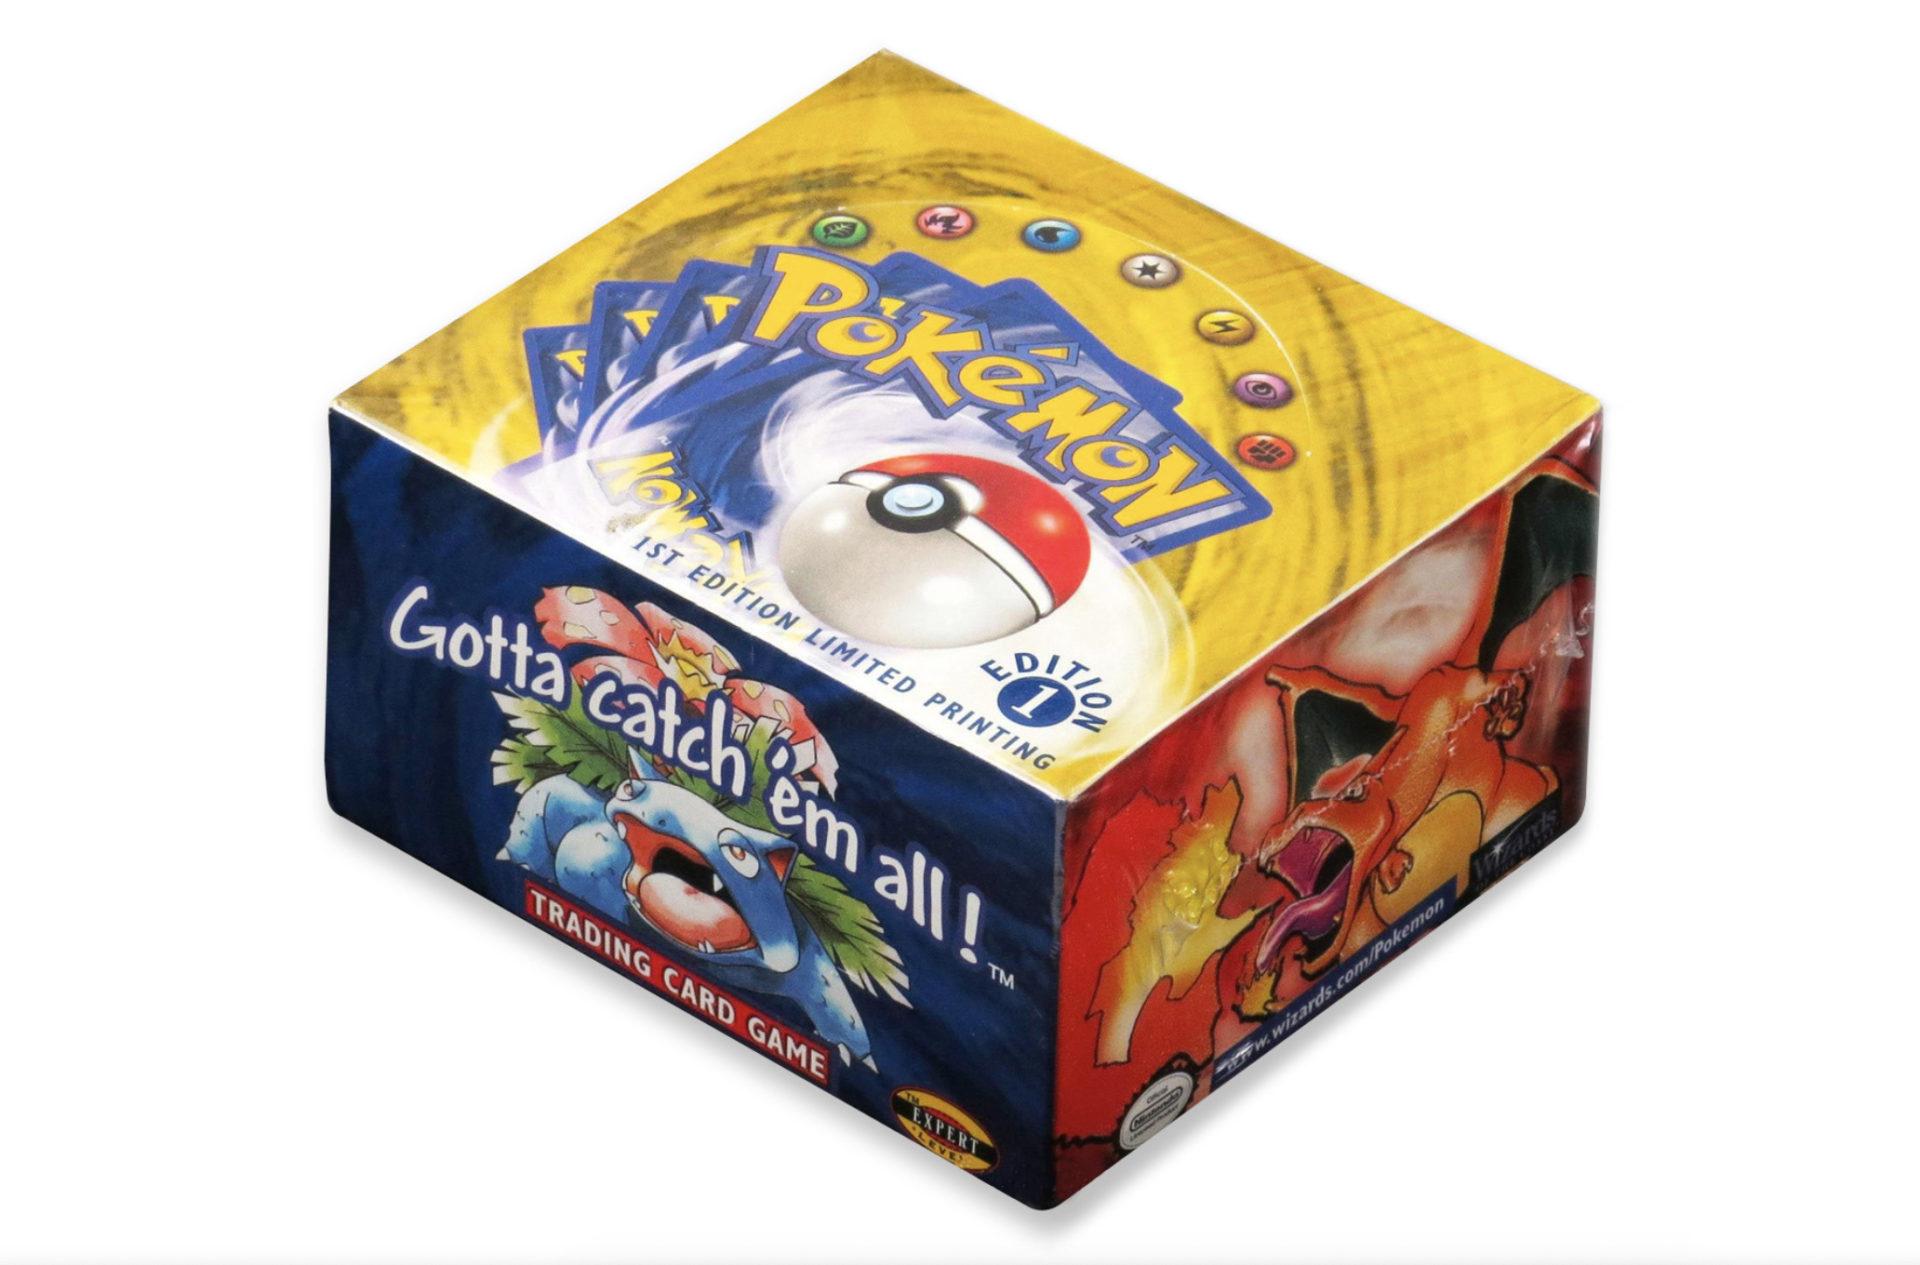 Screenshot of a 1999 1st edition booster box from the Pokemon Trading Card Game.